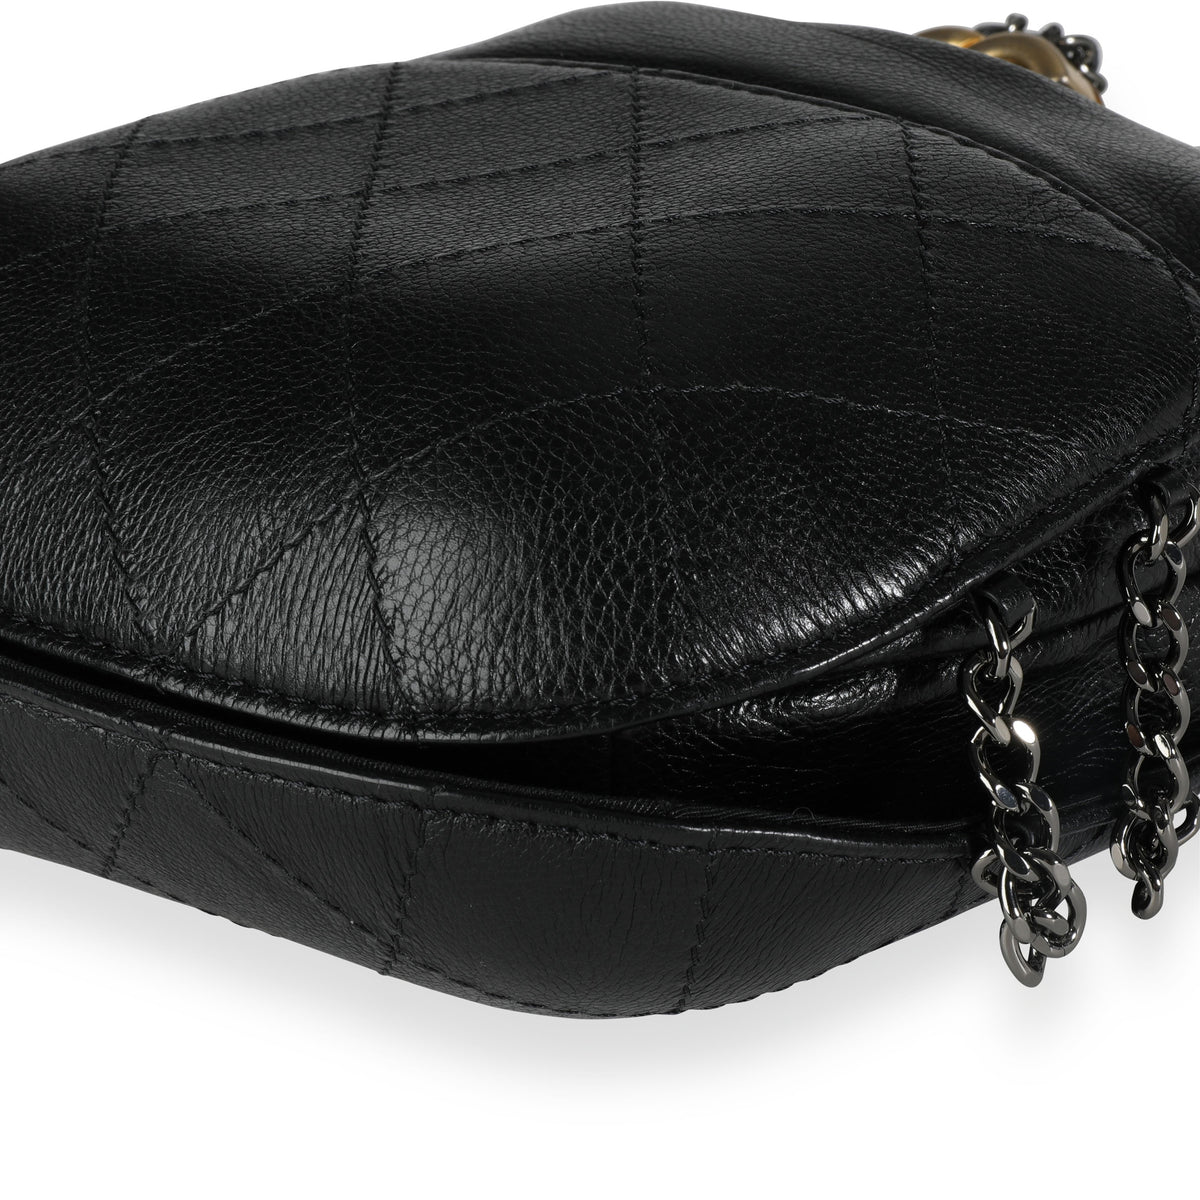 Chanel Black Quilted Calfskin Small Gabrielle Bucket Bag